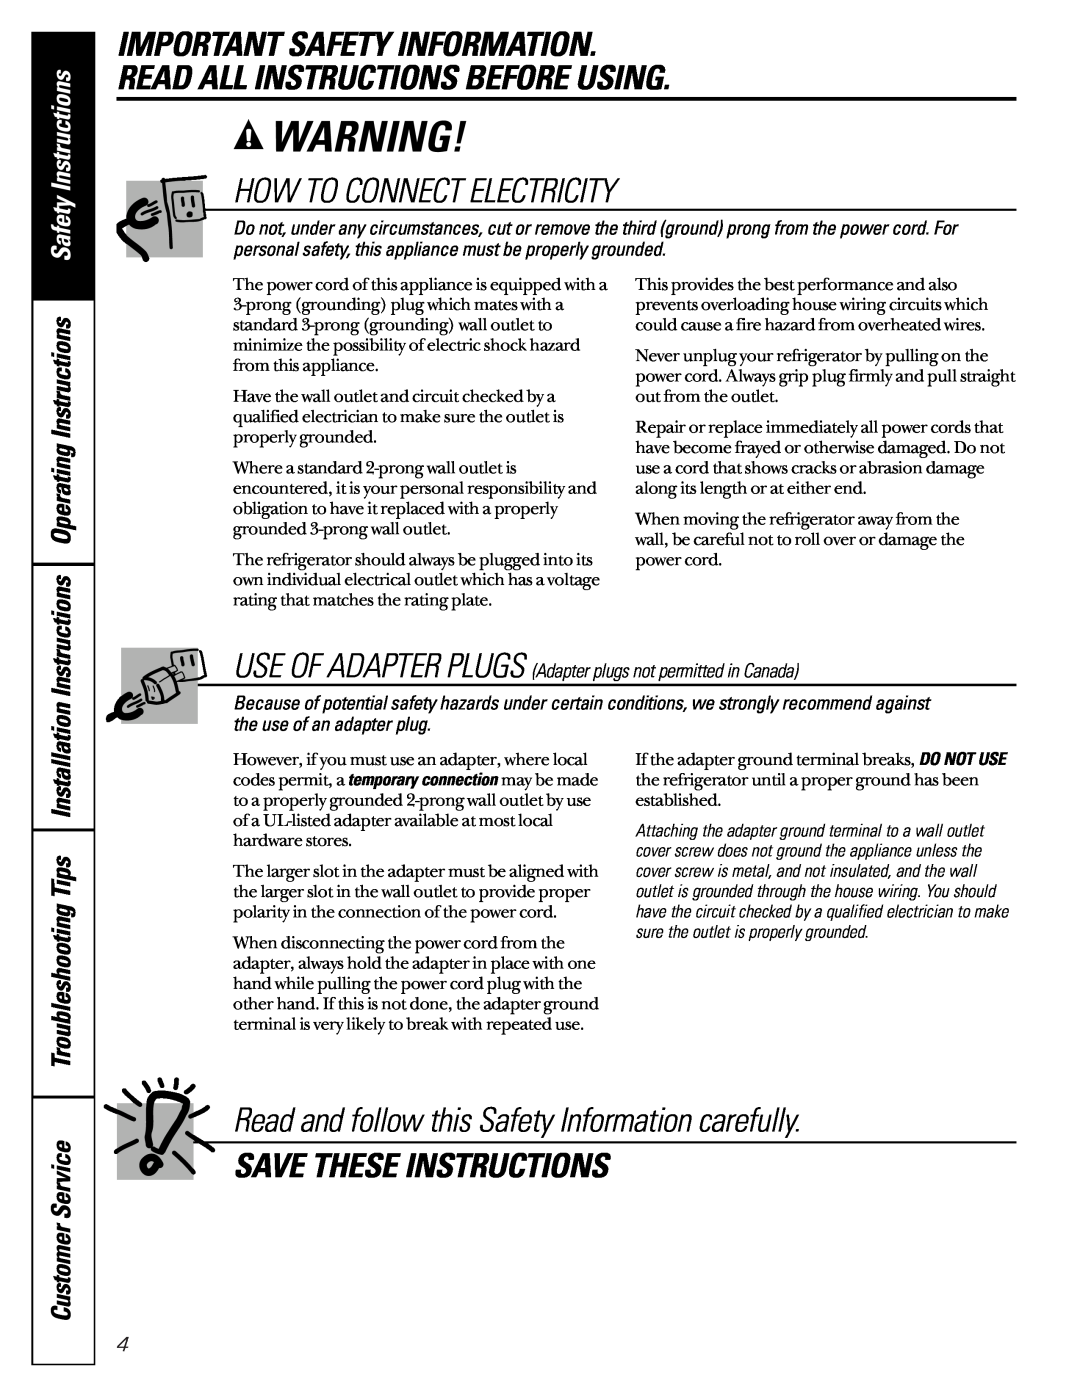 GE 162D9617P008 How To Connect Electricity, Save These Instructions, Read and follow this Safety Information carefully 